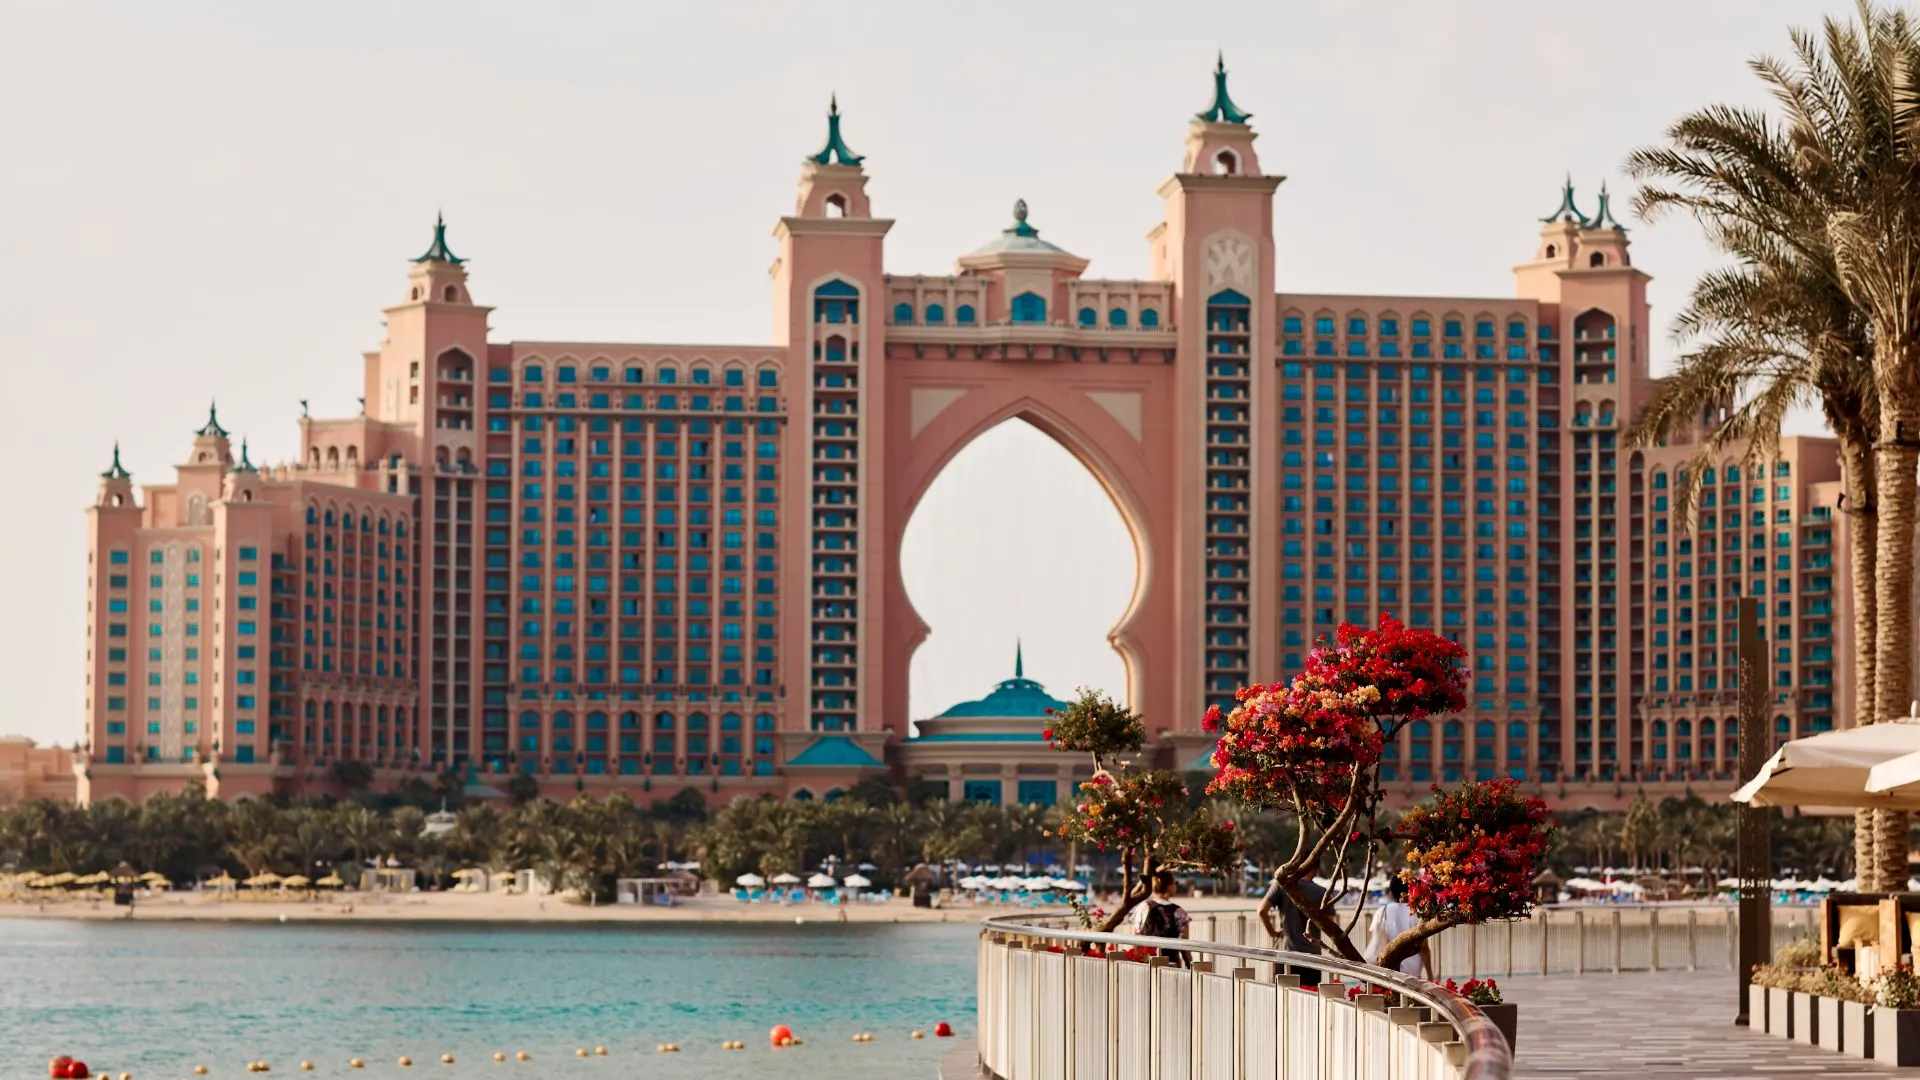 AxxonSoft PSIM selected to provide security for Atlantis The Palm luxury hotel resort in Dubai